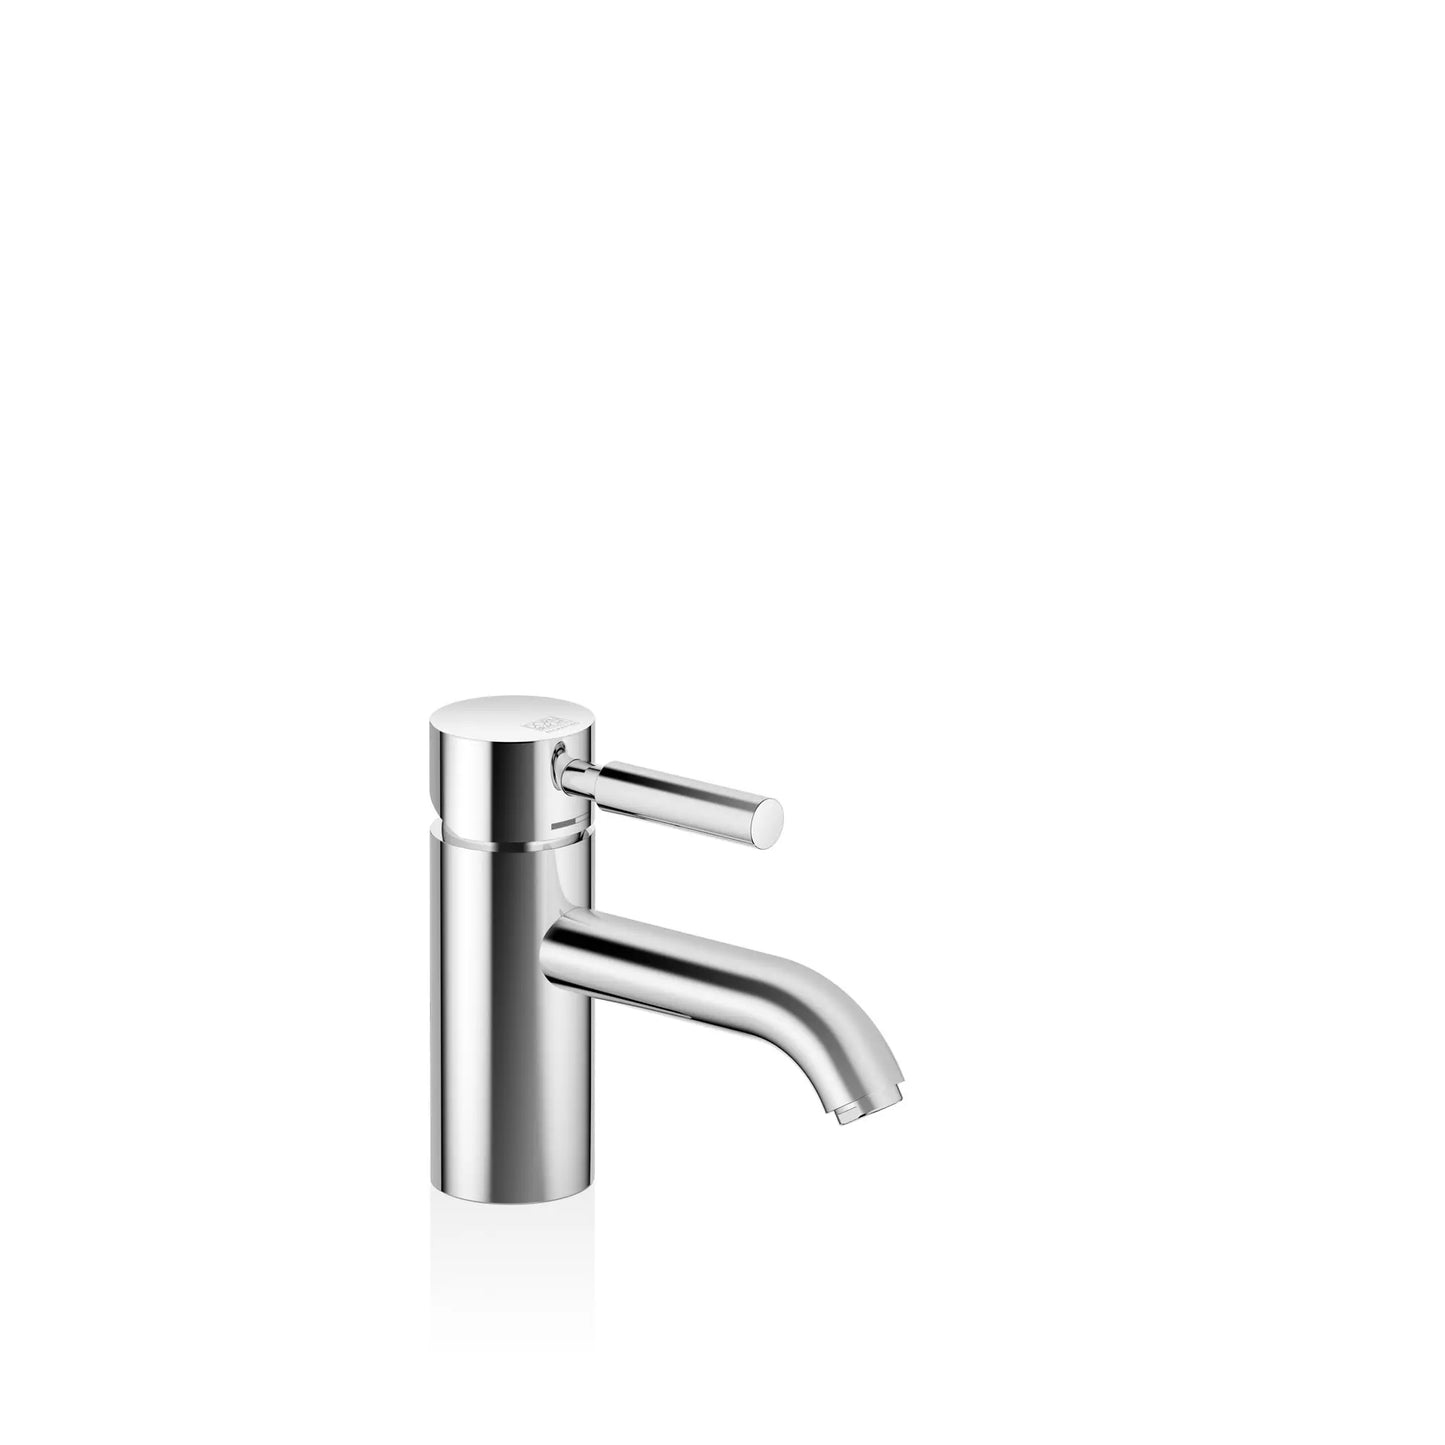 EDITION PRO Single-lever basin mixer without pop-up waste 